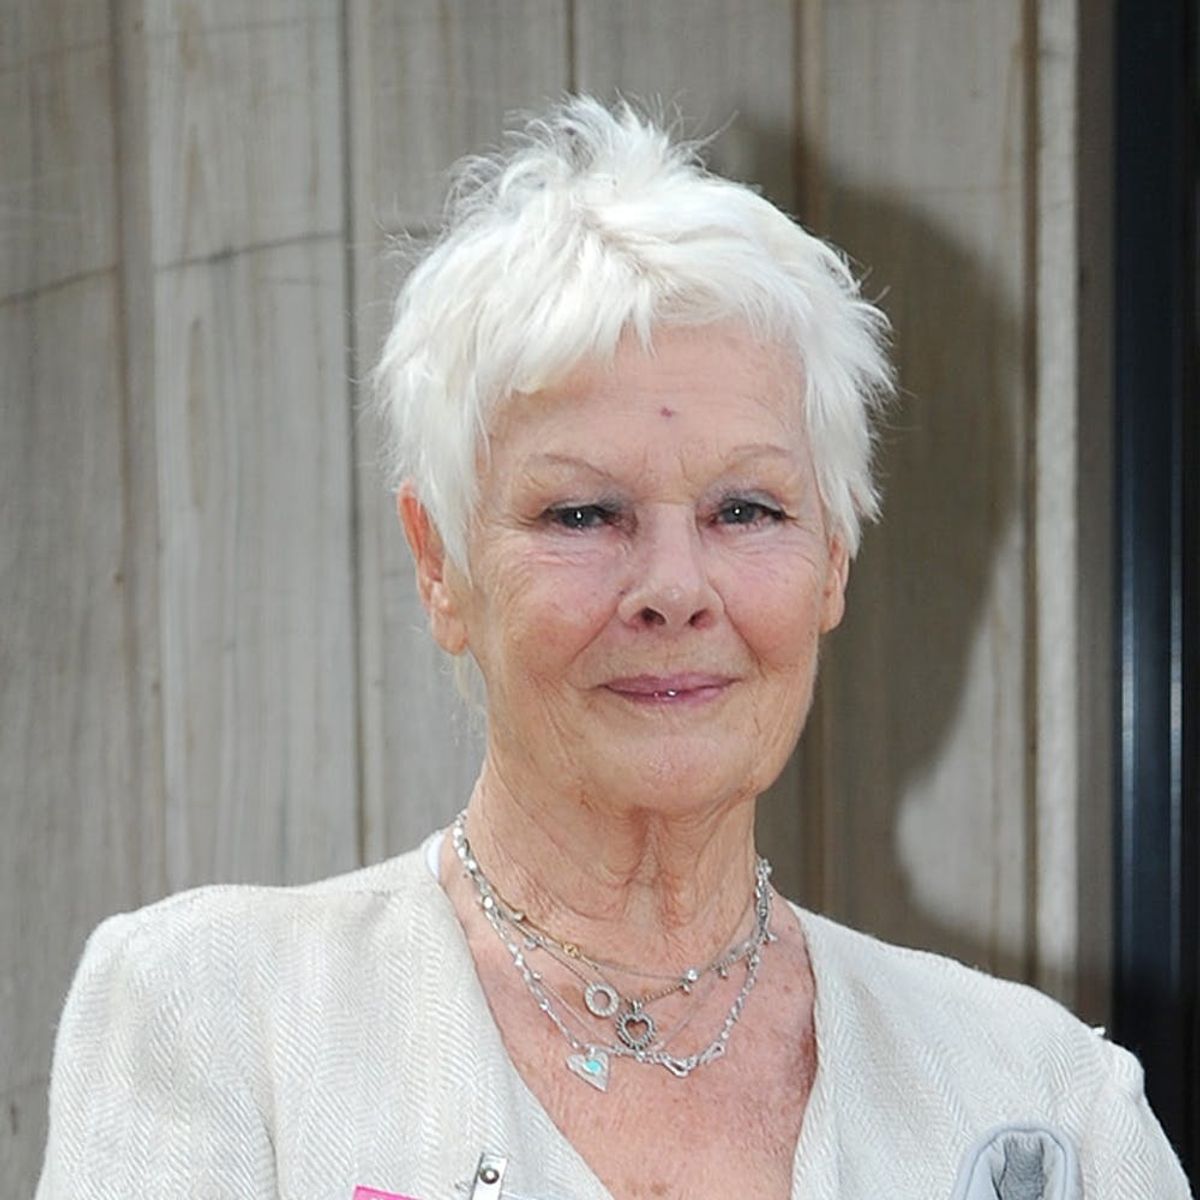 81-Year-Old Dame Judi Dench Just Got Her First Tattoo